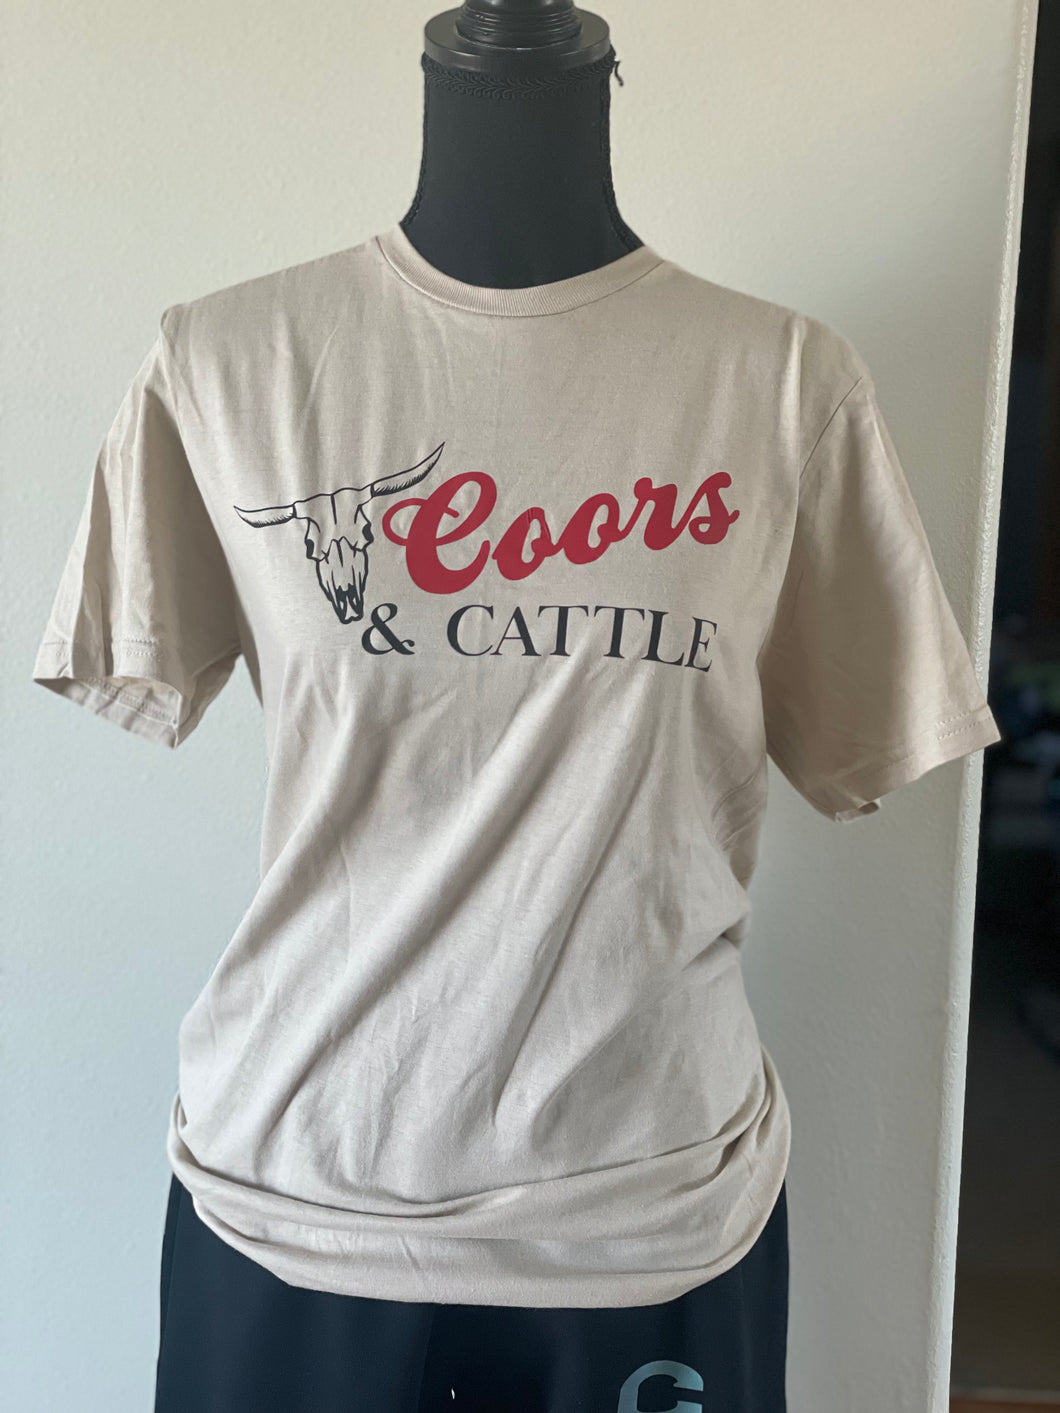 Coors and Cattle tee